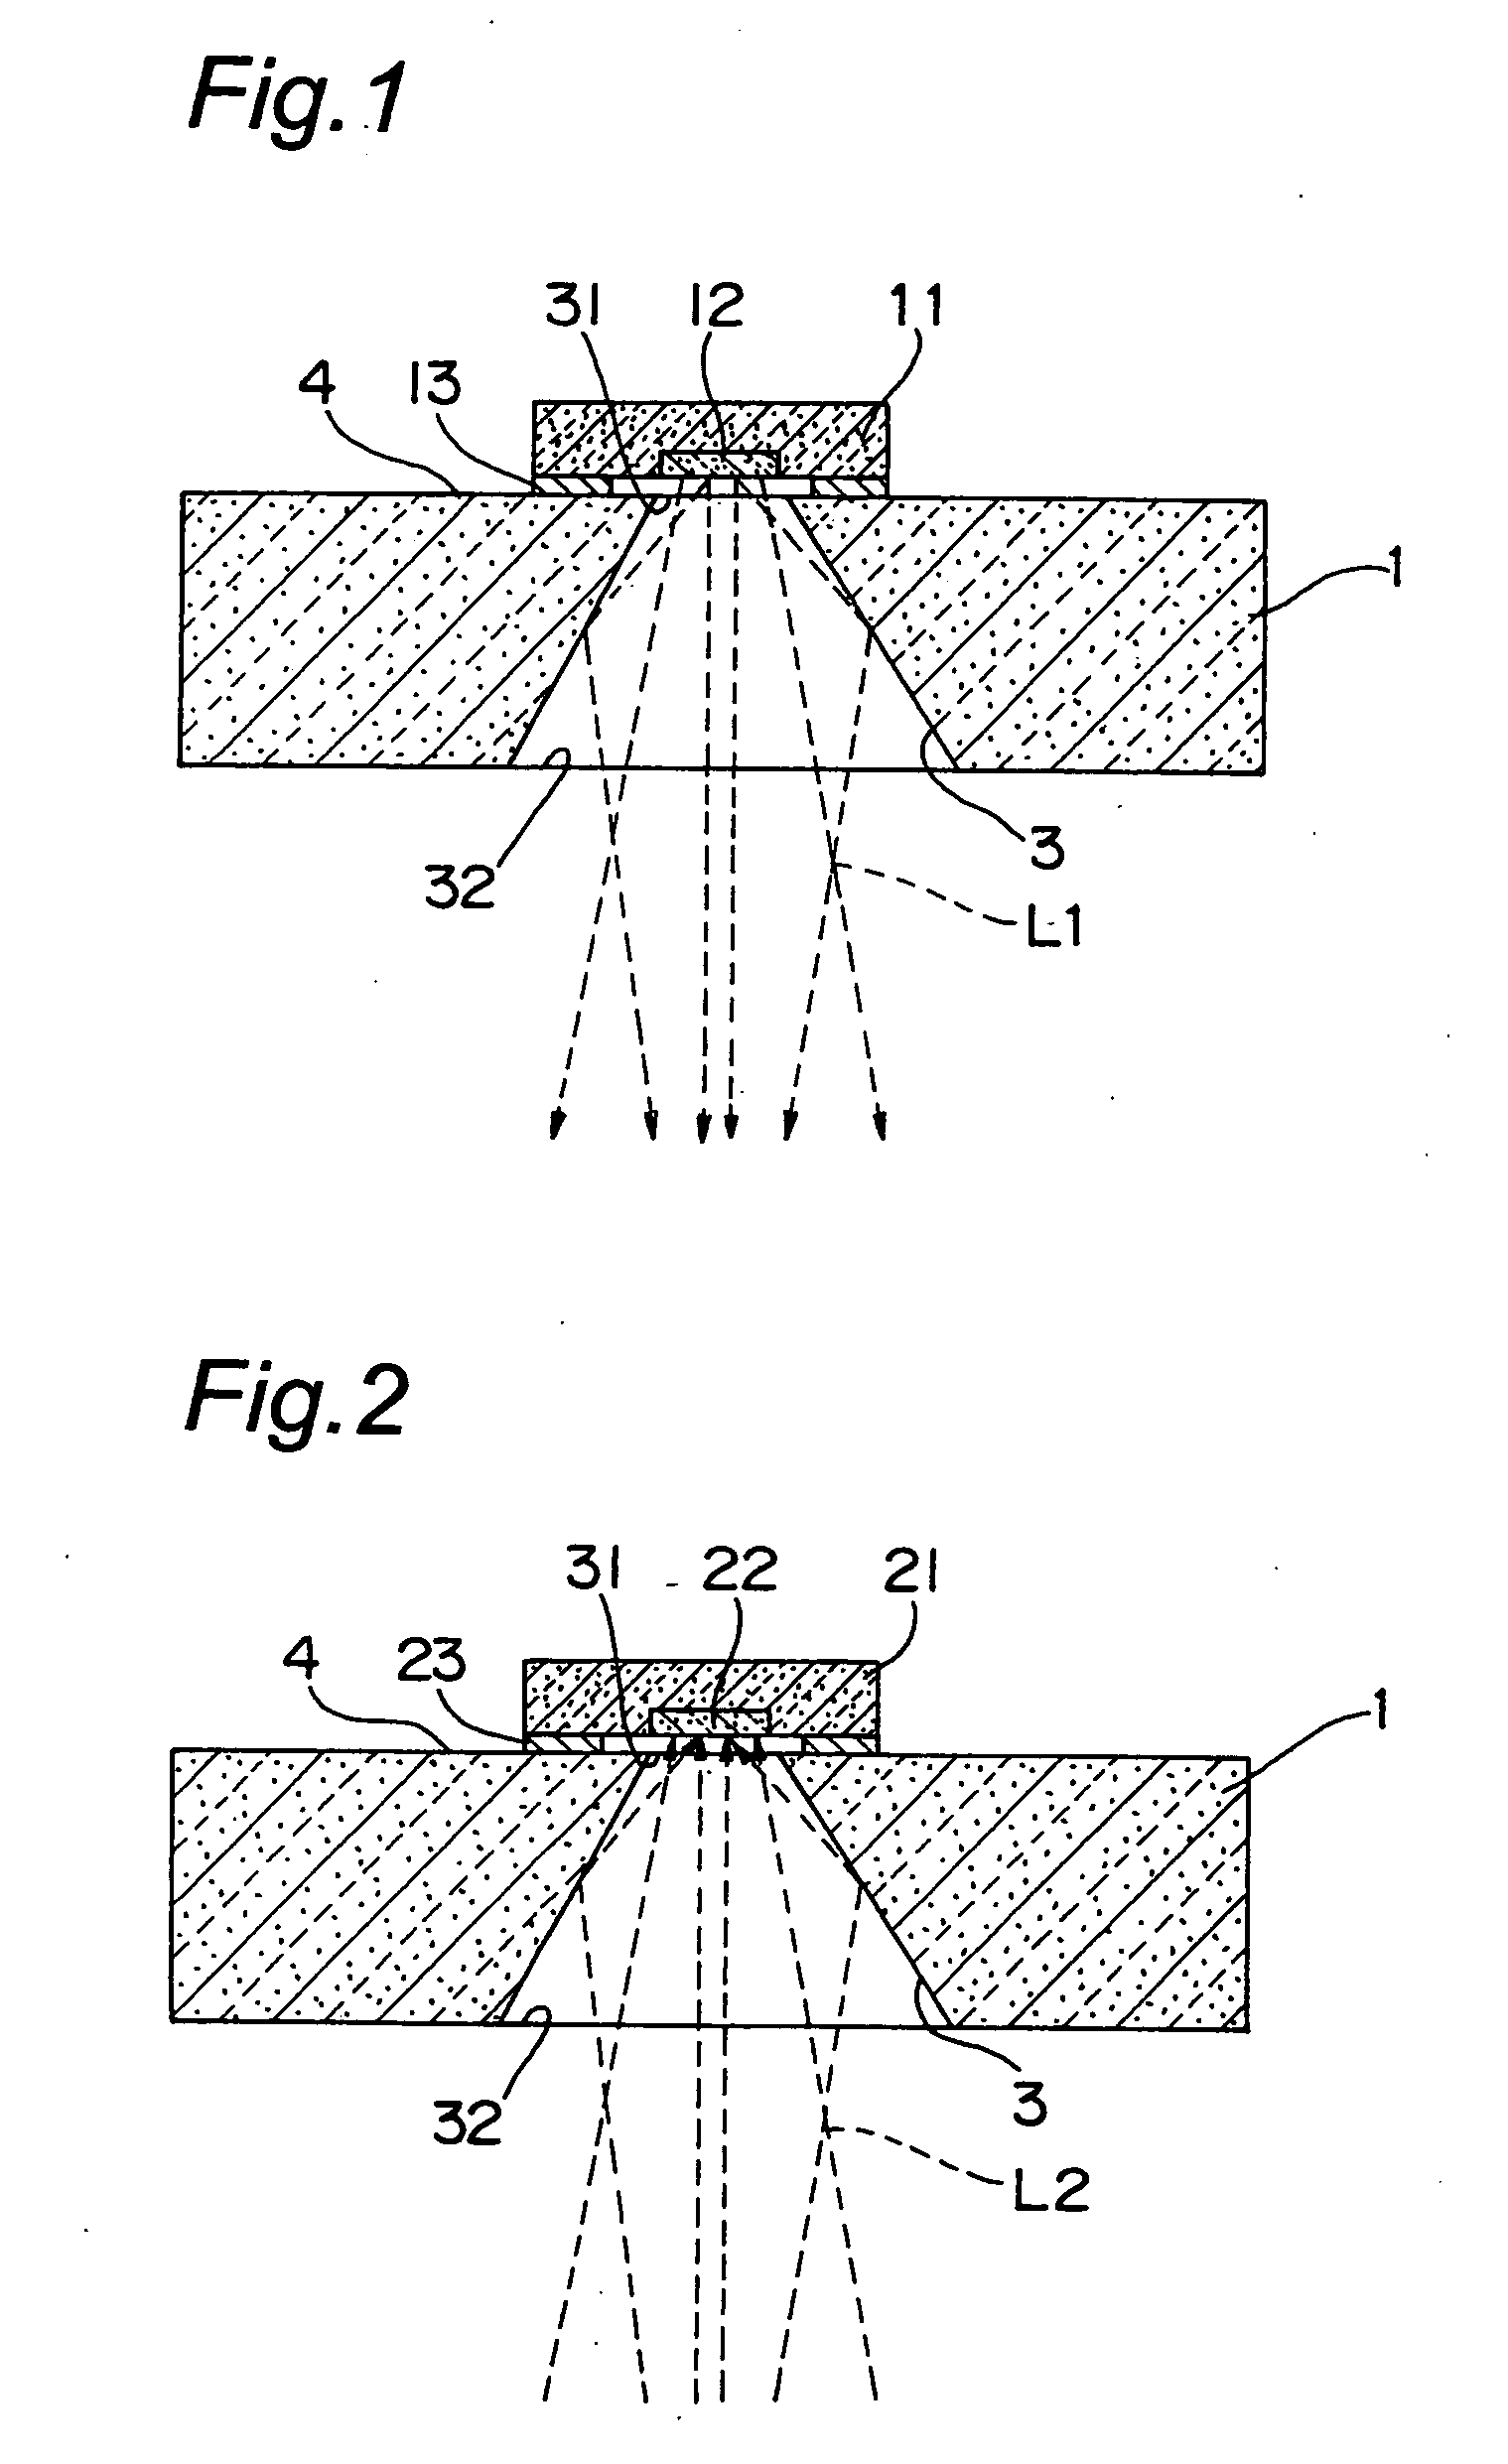 Submount for light emitting/receiving device